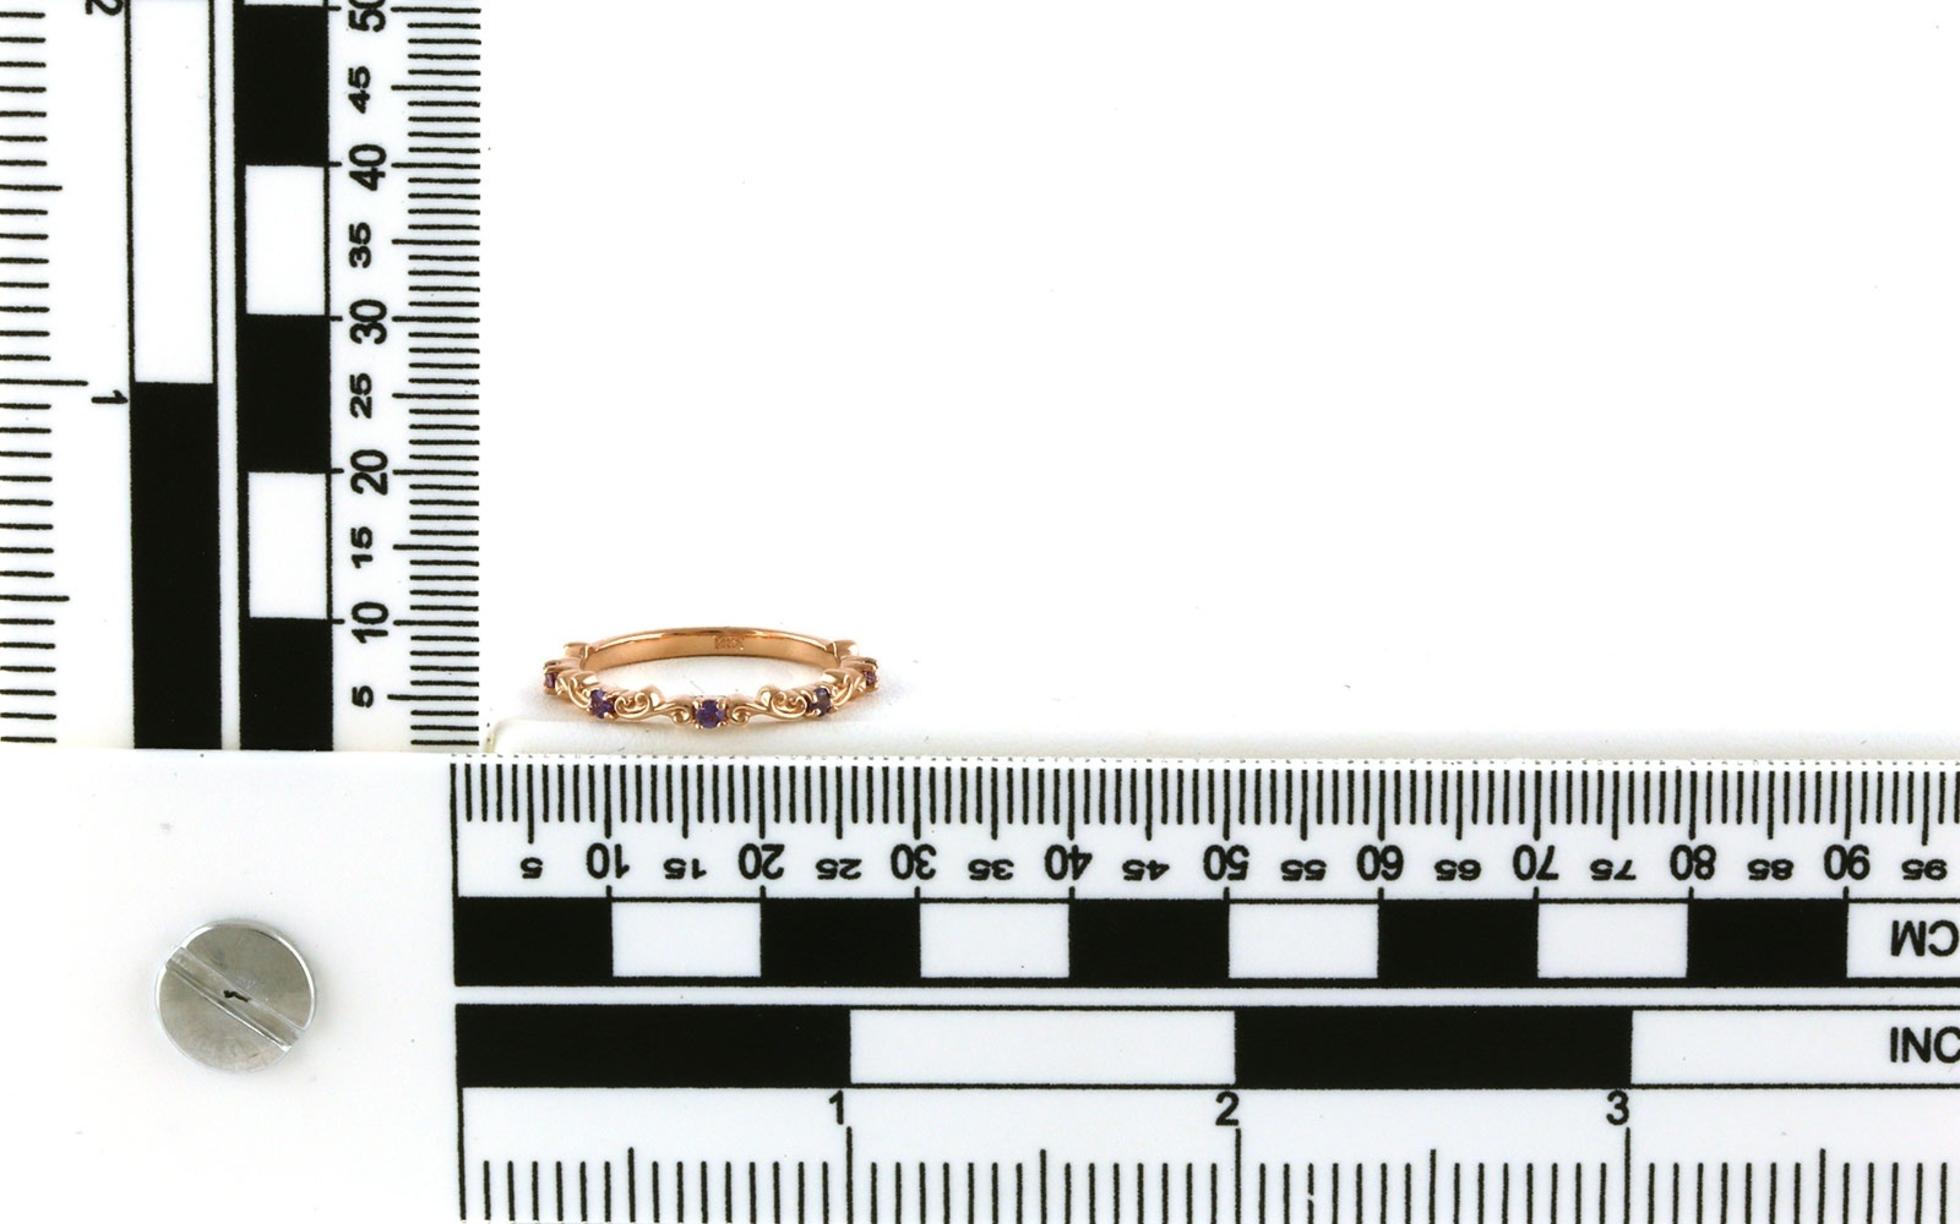 5-Stone Scrolling Vine Huckleberry Sapphire Band in Rose Gold (0.16cts TWT) scale